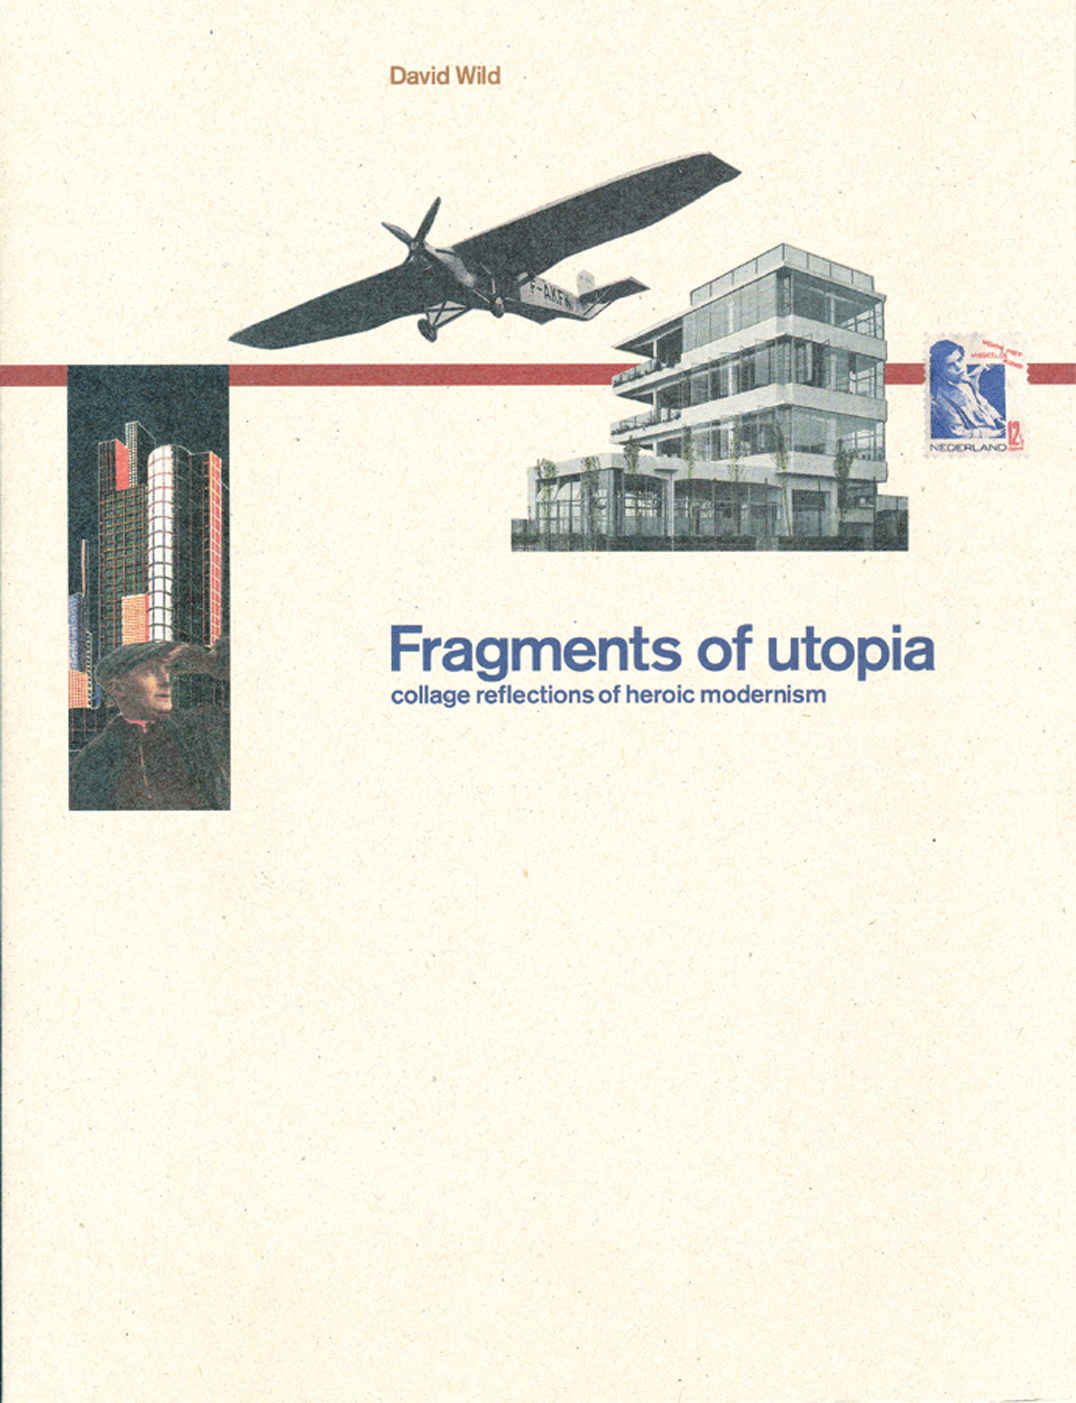 Fragments of utopia: reflections of heroic modernism